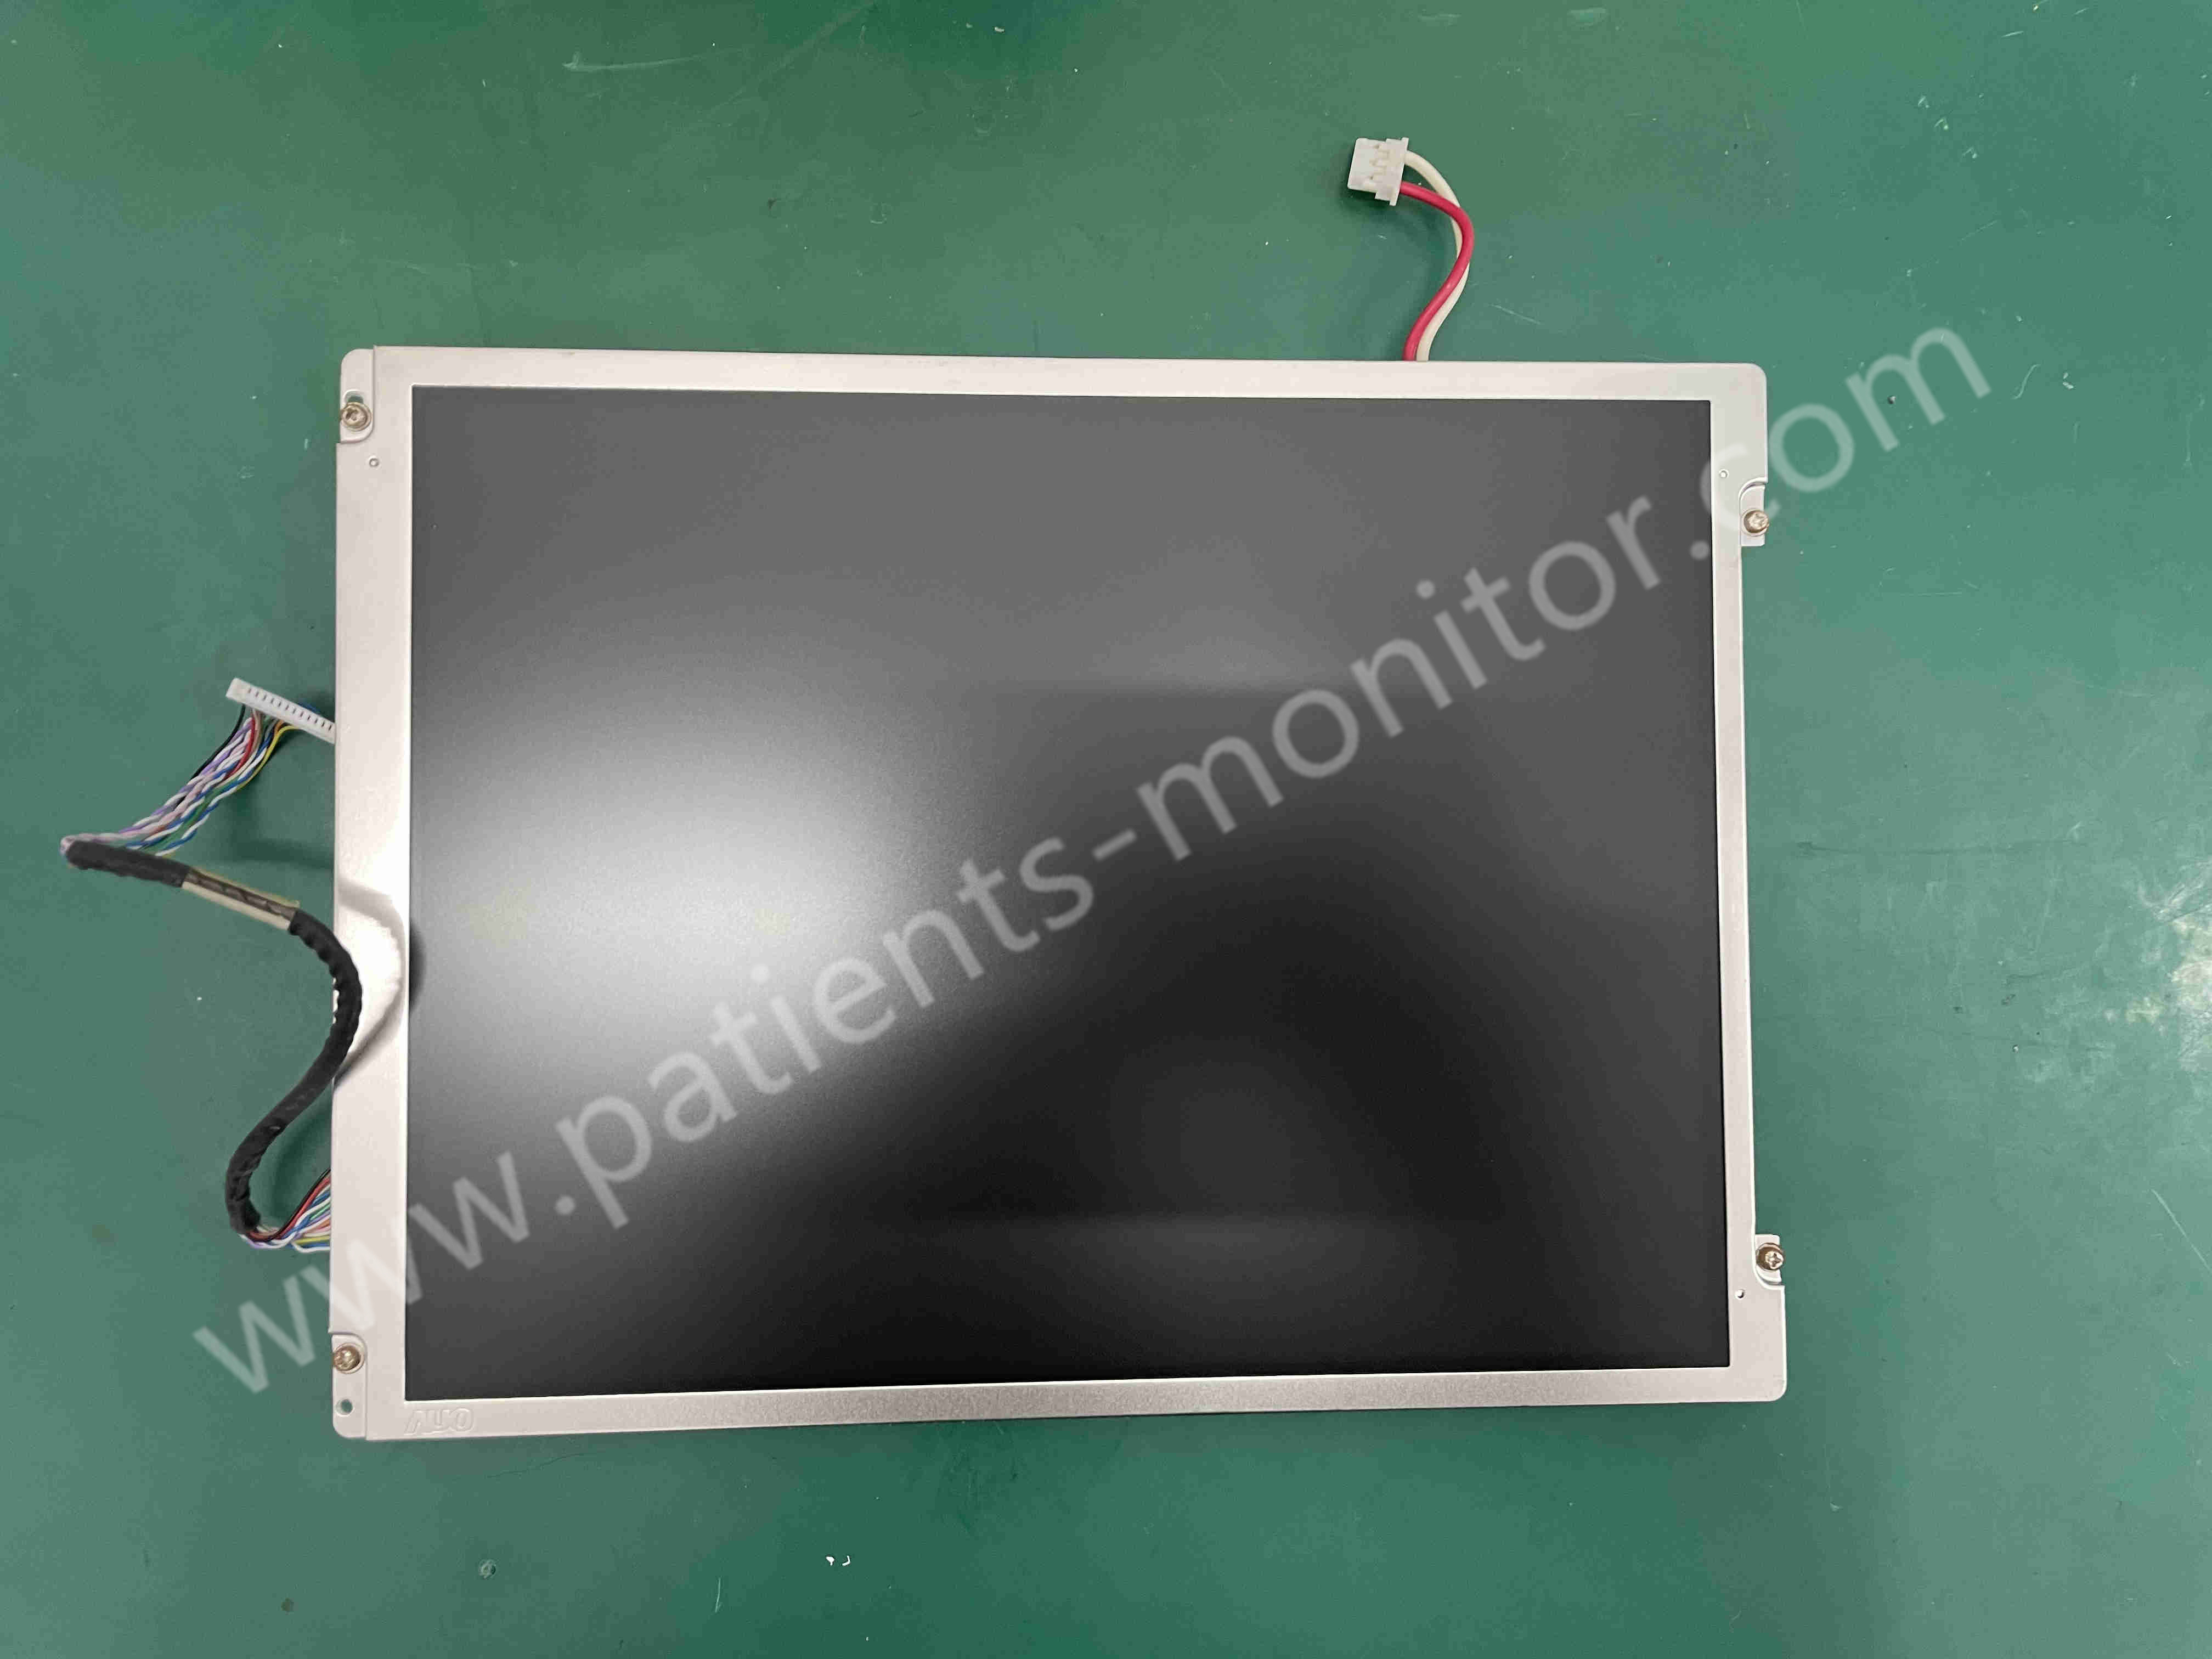  PM7000 PM-7000 Patient Monitor Display G104SN03 Medical Equipment Parts Manufactures